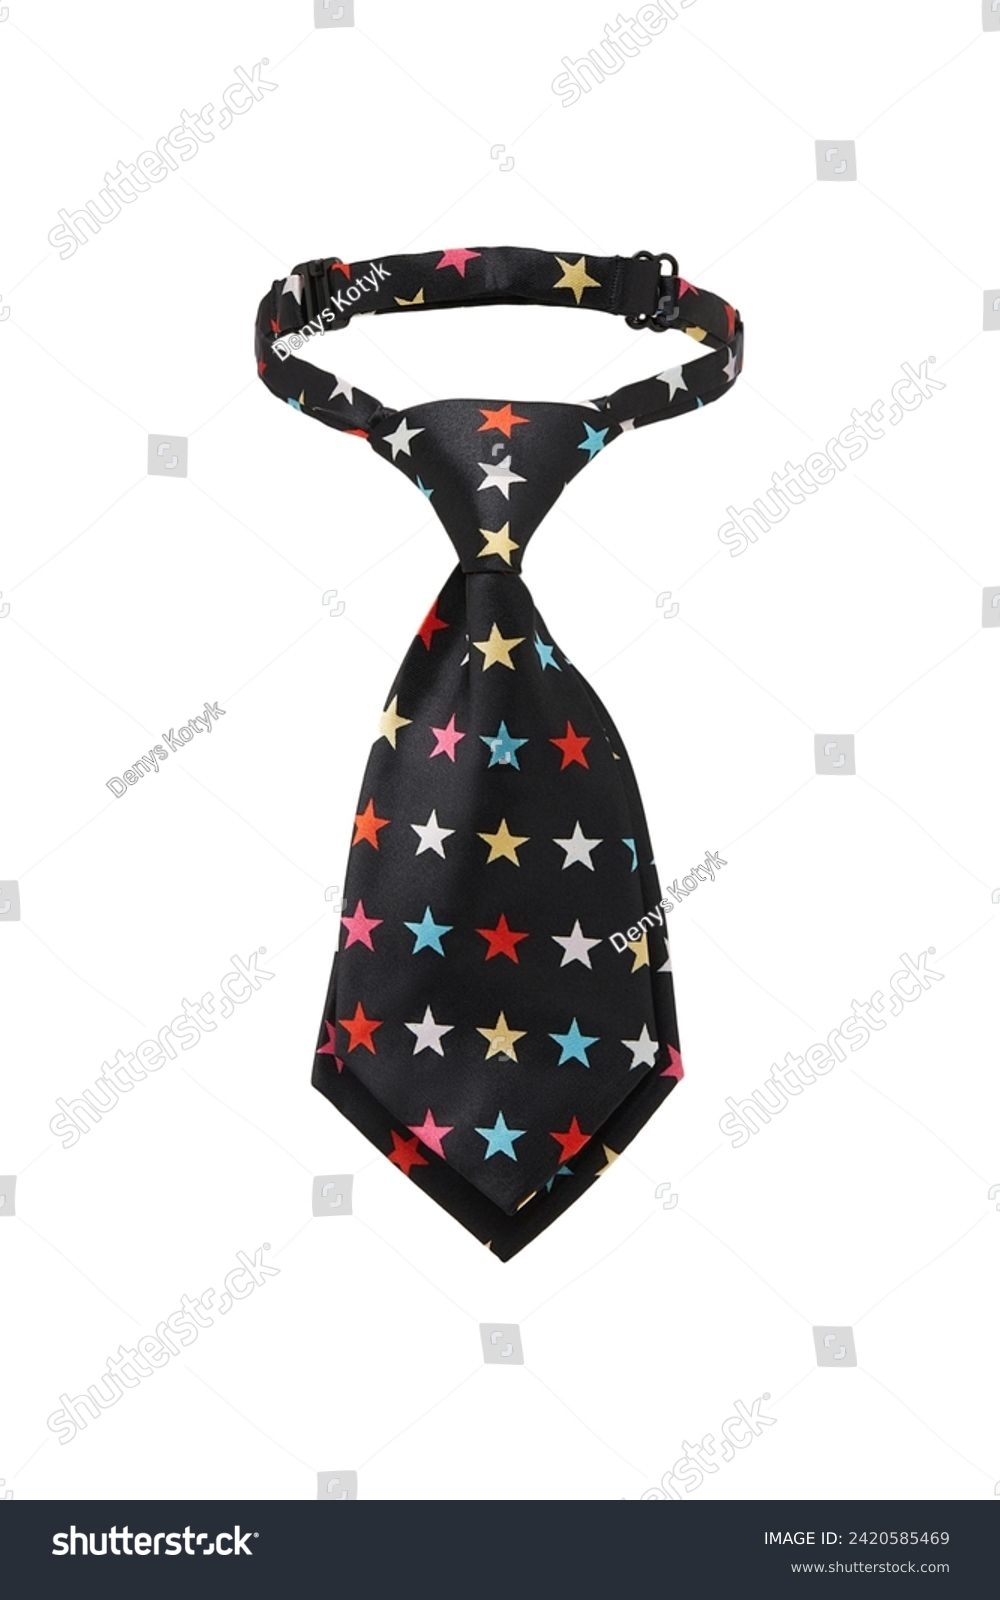 Close-up shot of a short women's tie with a star print. Pre-tied black tie with an adjustable strap is isolated on a white background. Front view.